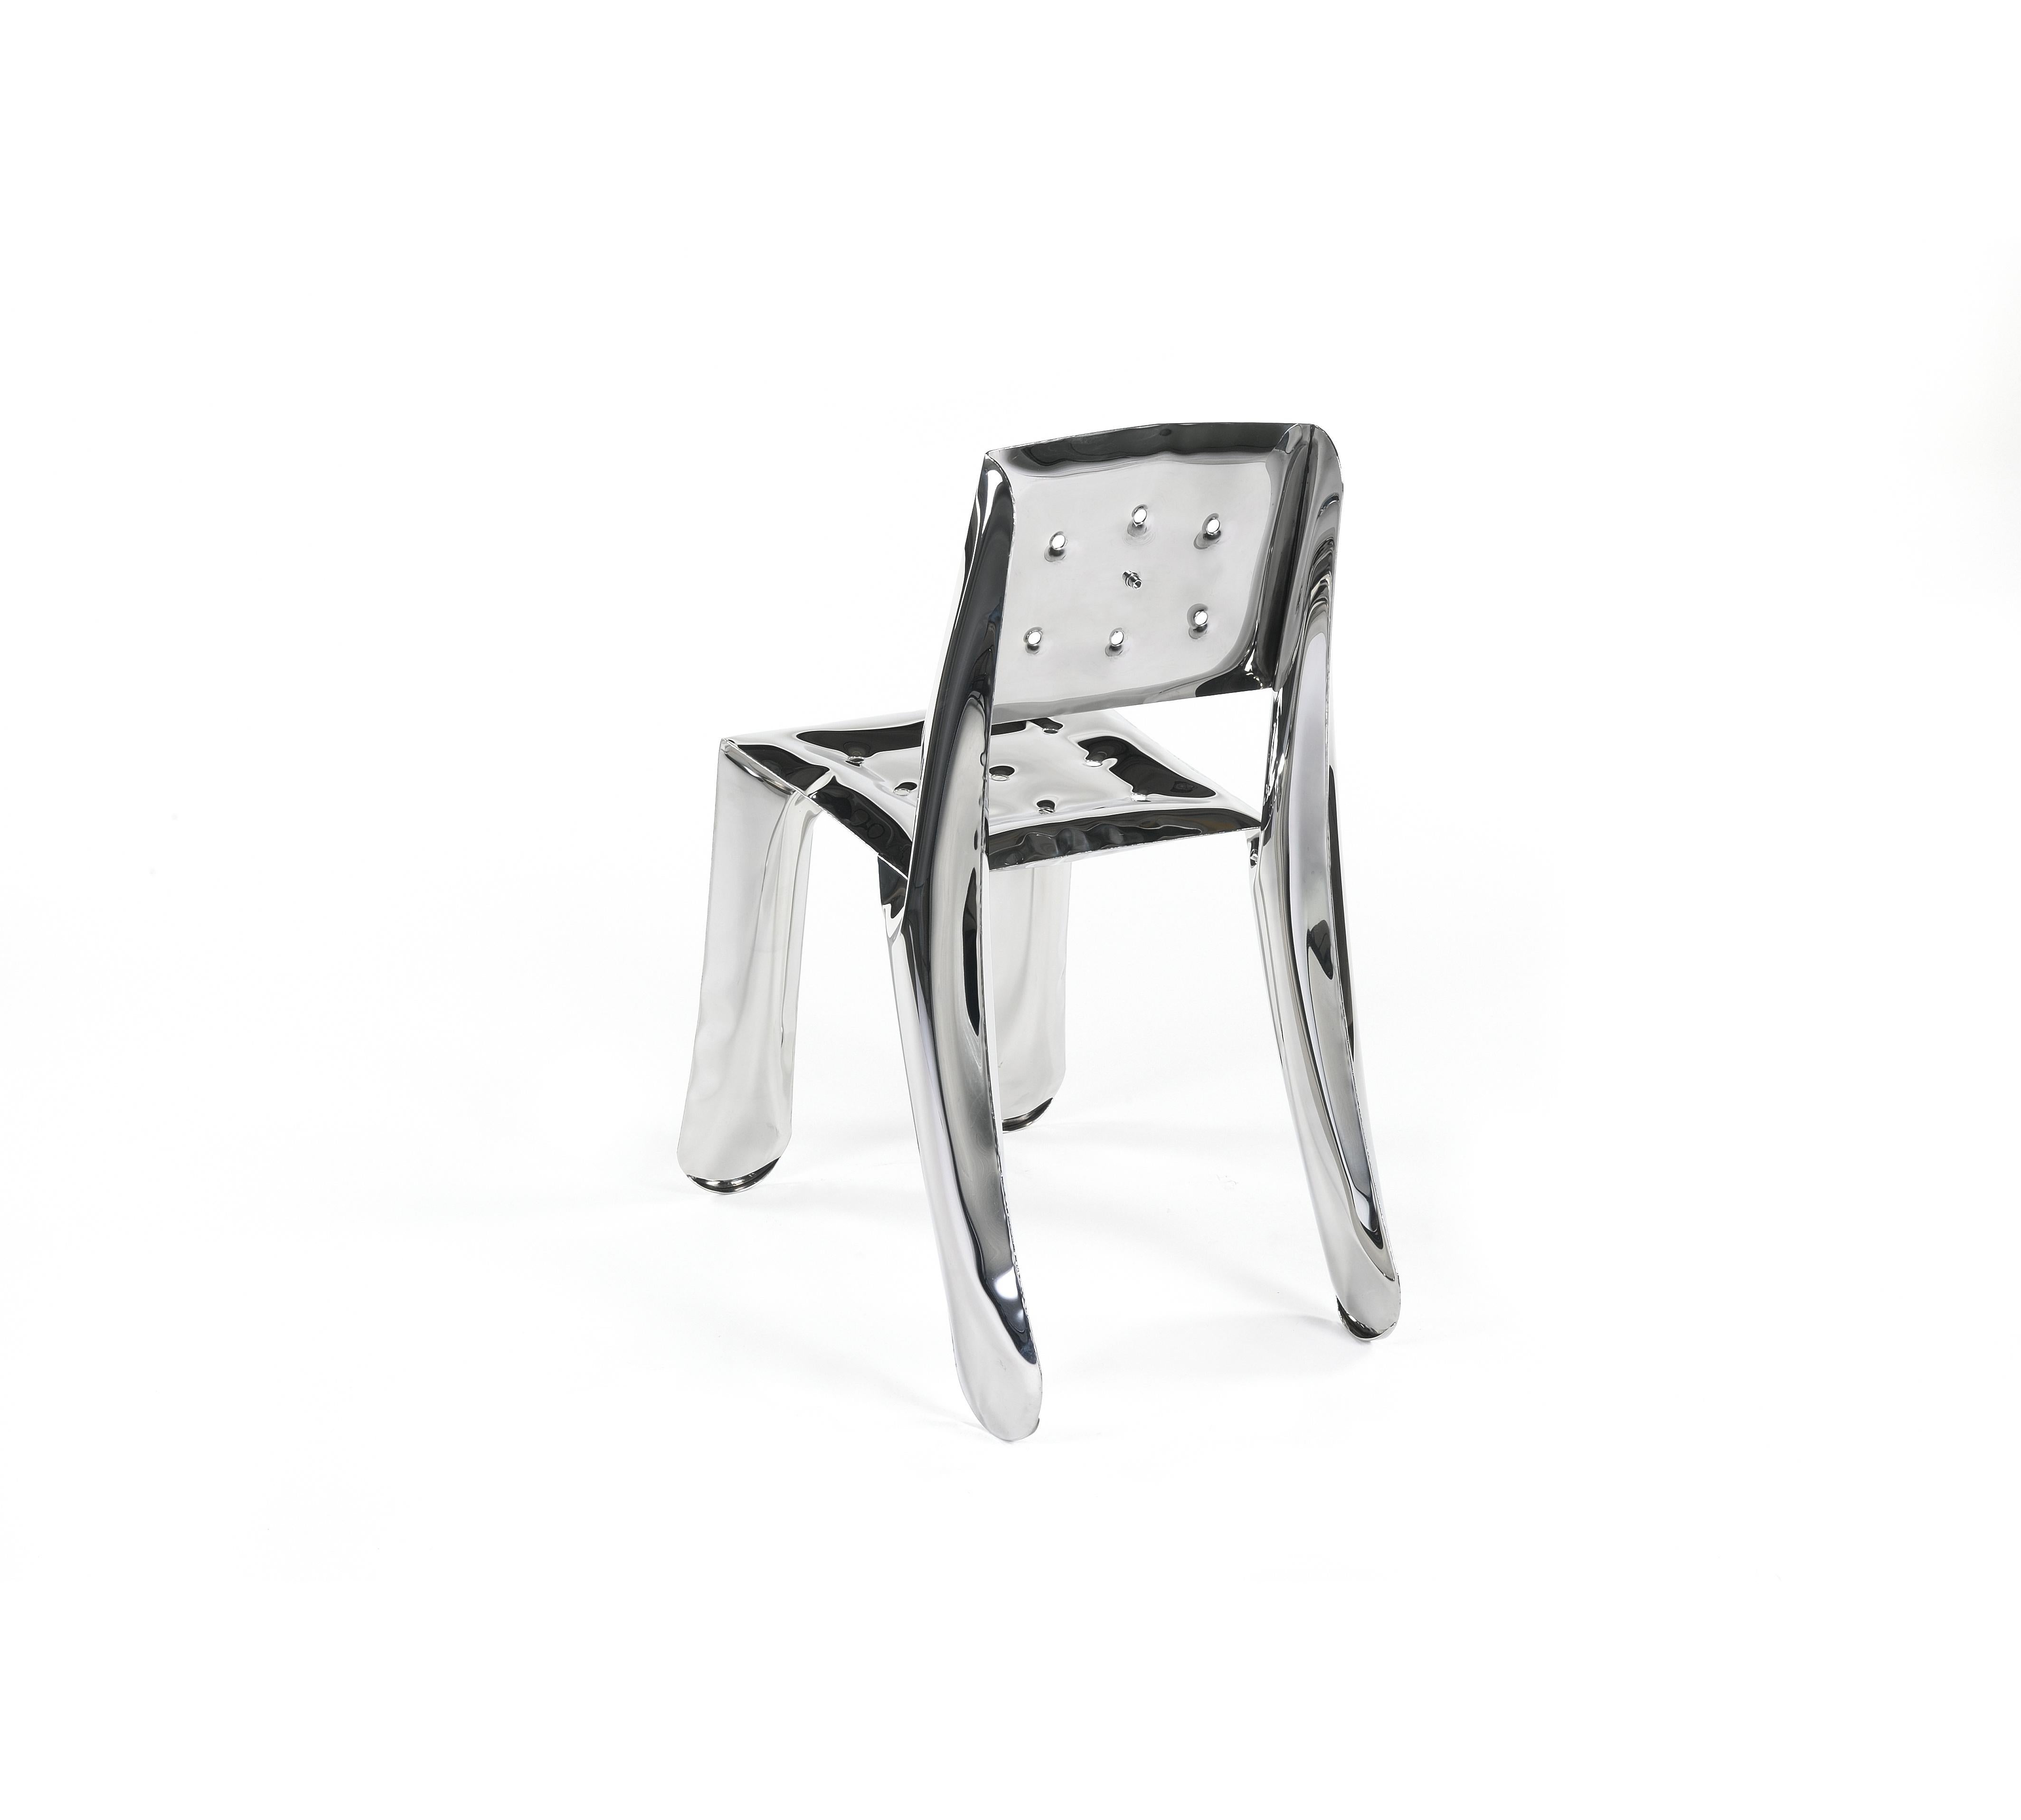 A development of the limited edition Chippensteel chair available in new colors. It still offers a unique material experience but the shape of the chair has been slightly redesigned to allow a mass production.

The chair has been uniquely